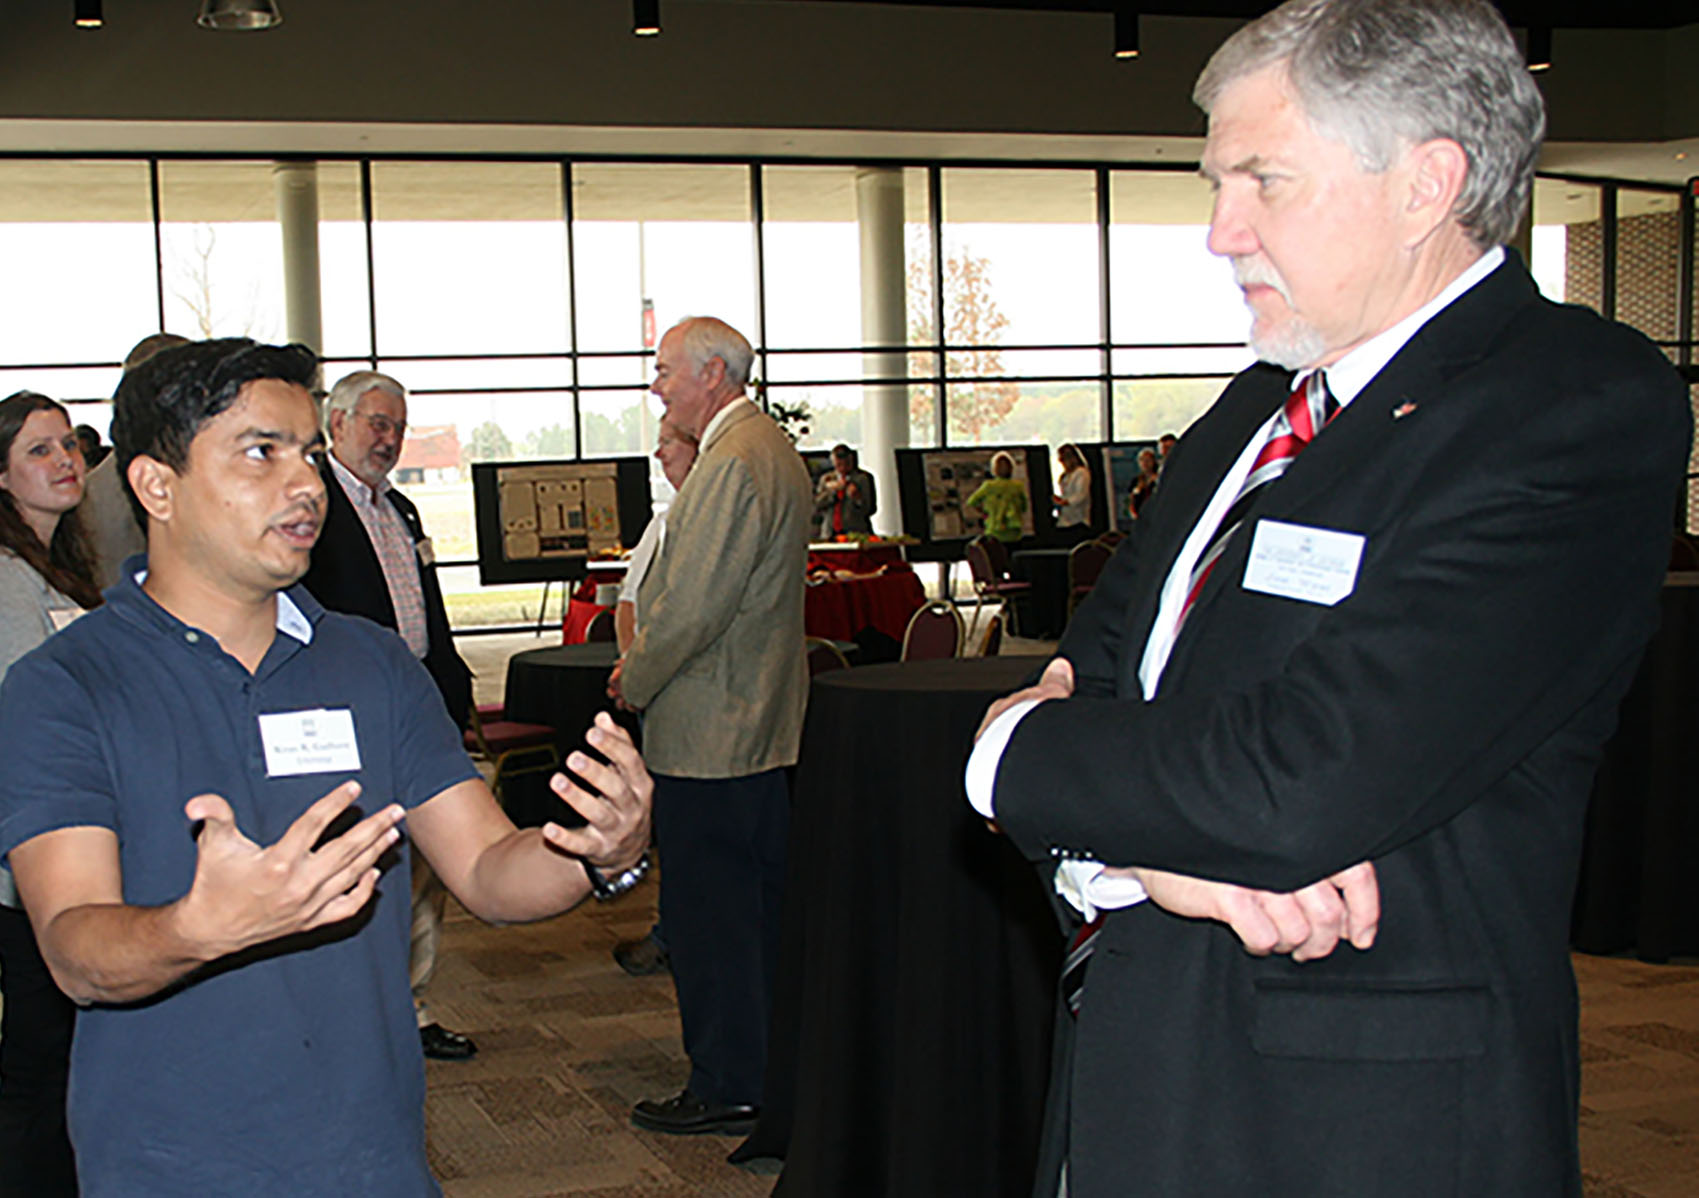 UGA graduate student Kiran Gadhave speaks about his research with Joe West, assistant dean on the UGA Tifton Campus on March 17, 2016.